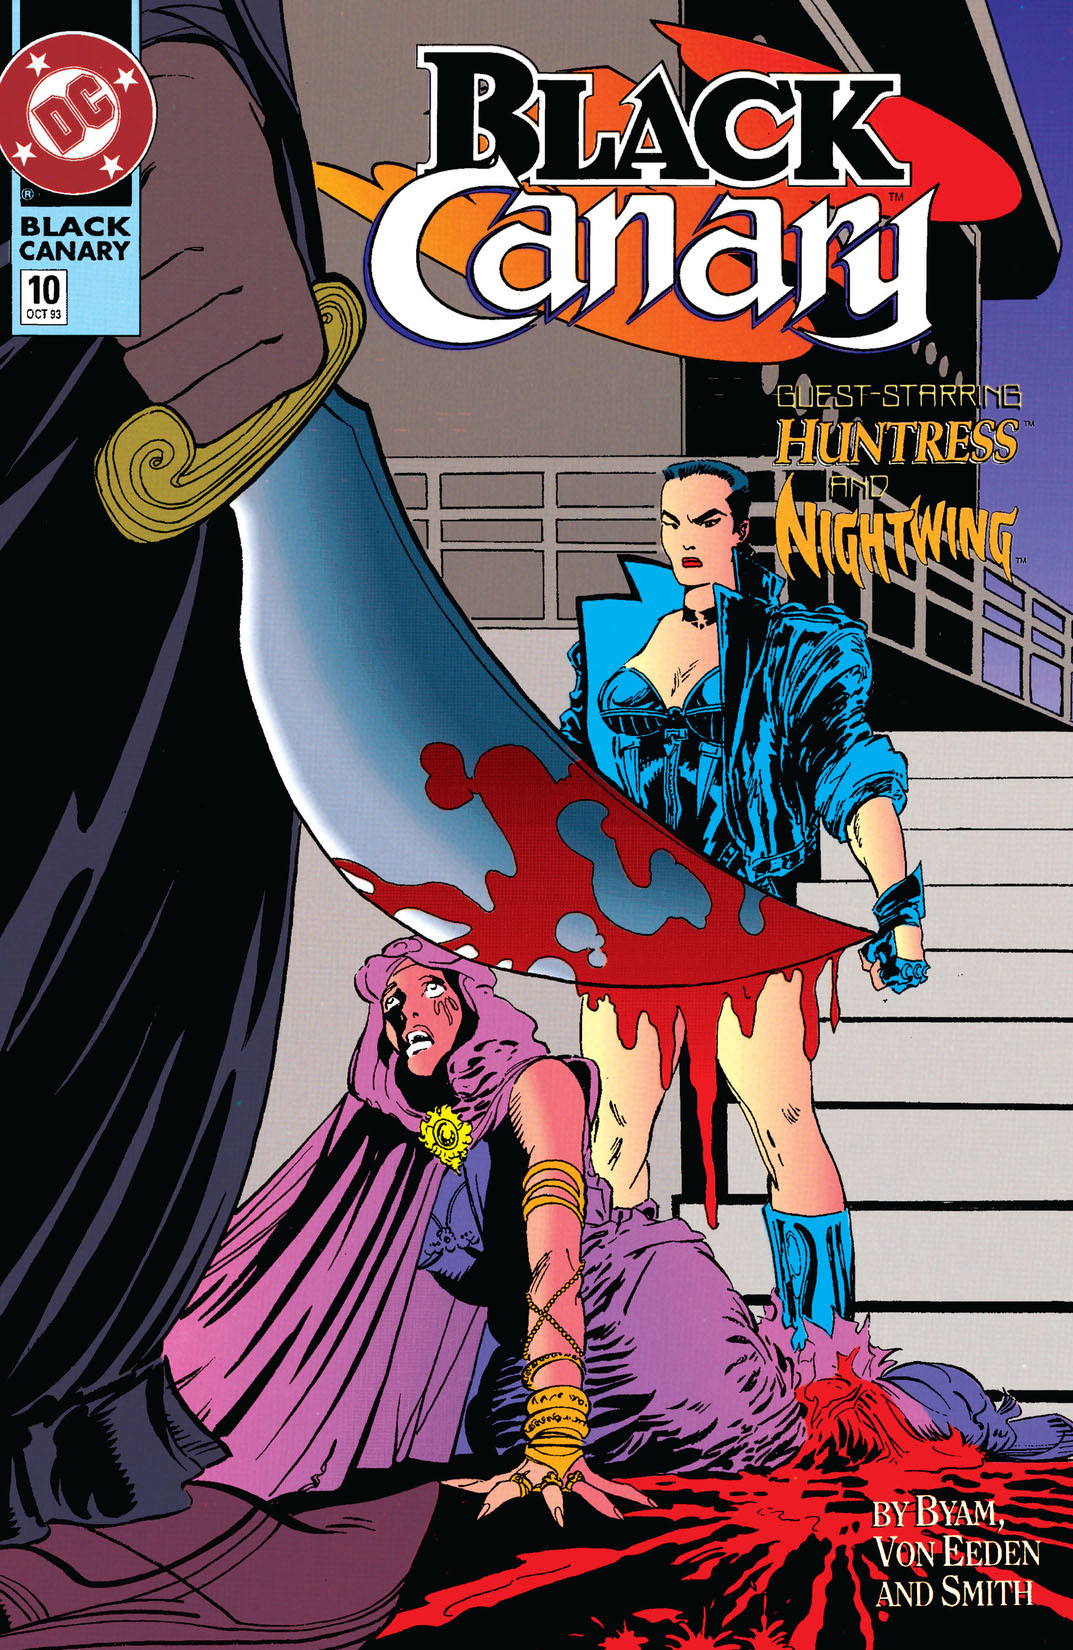 Black Canary (1992-) #10 preview images